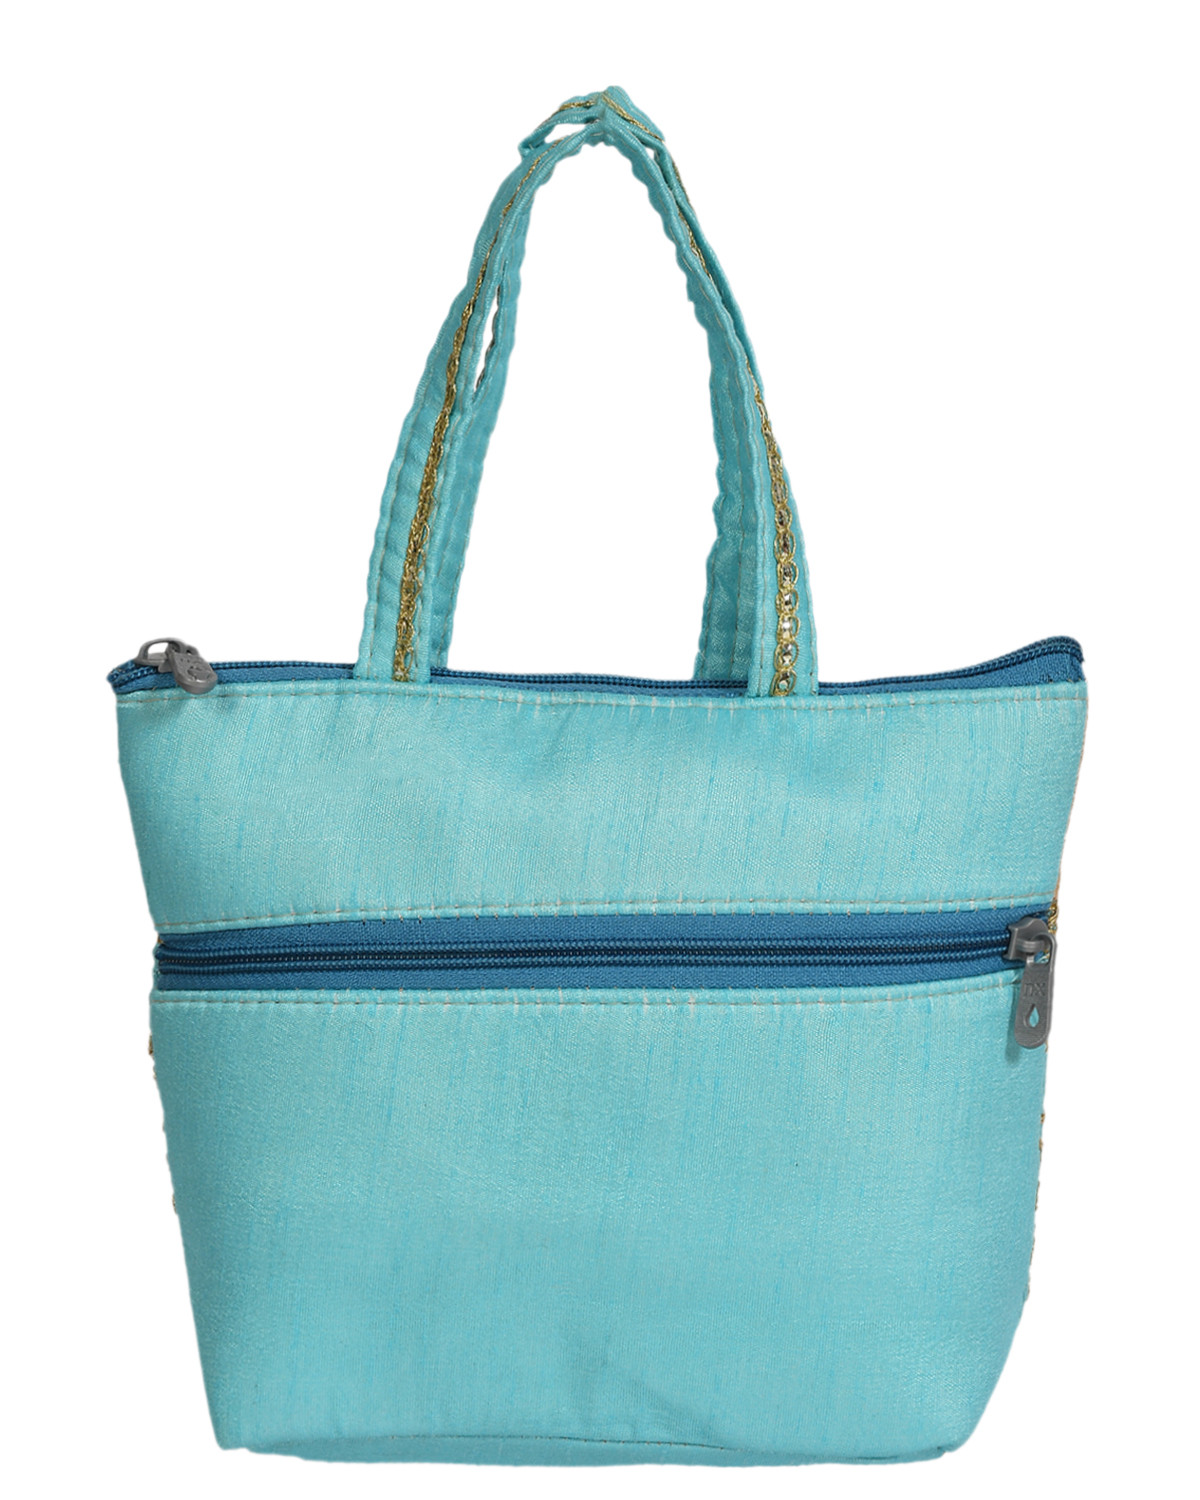 Kuber Industries Polyester Embroidery Design Hand Bag For Women/Girls With Handle (Sky Blue) 54KM4038